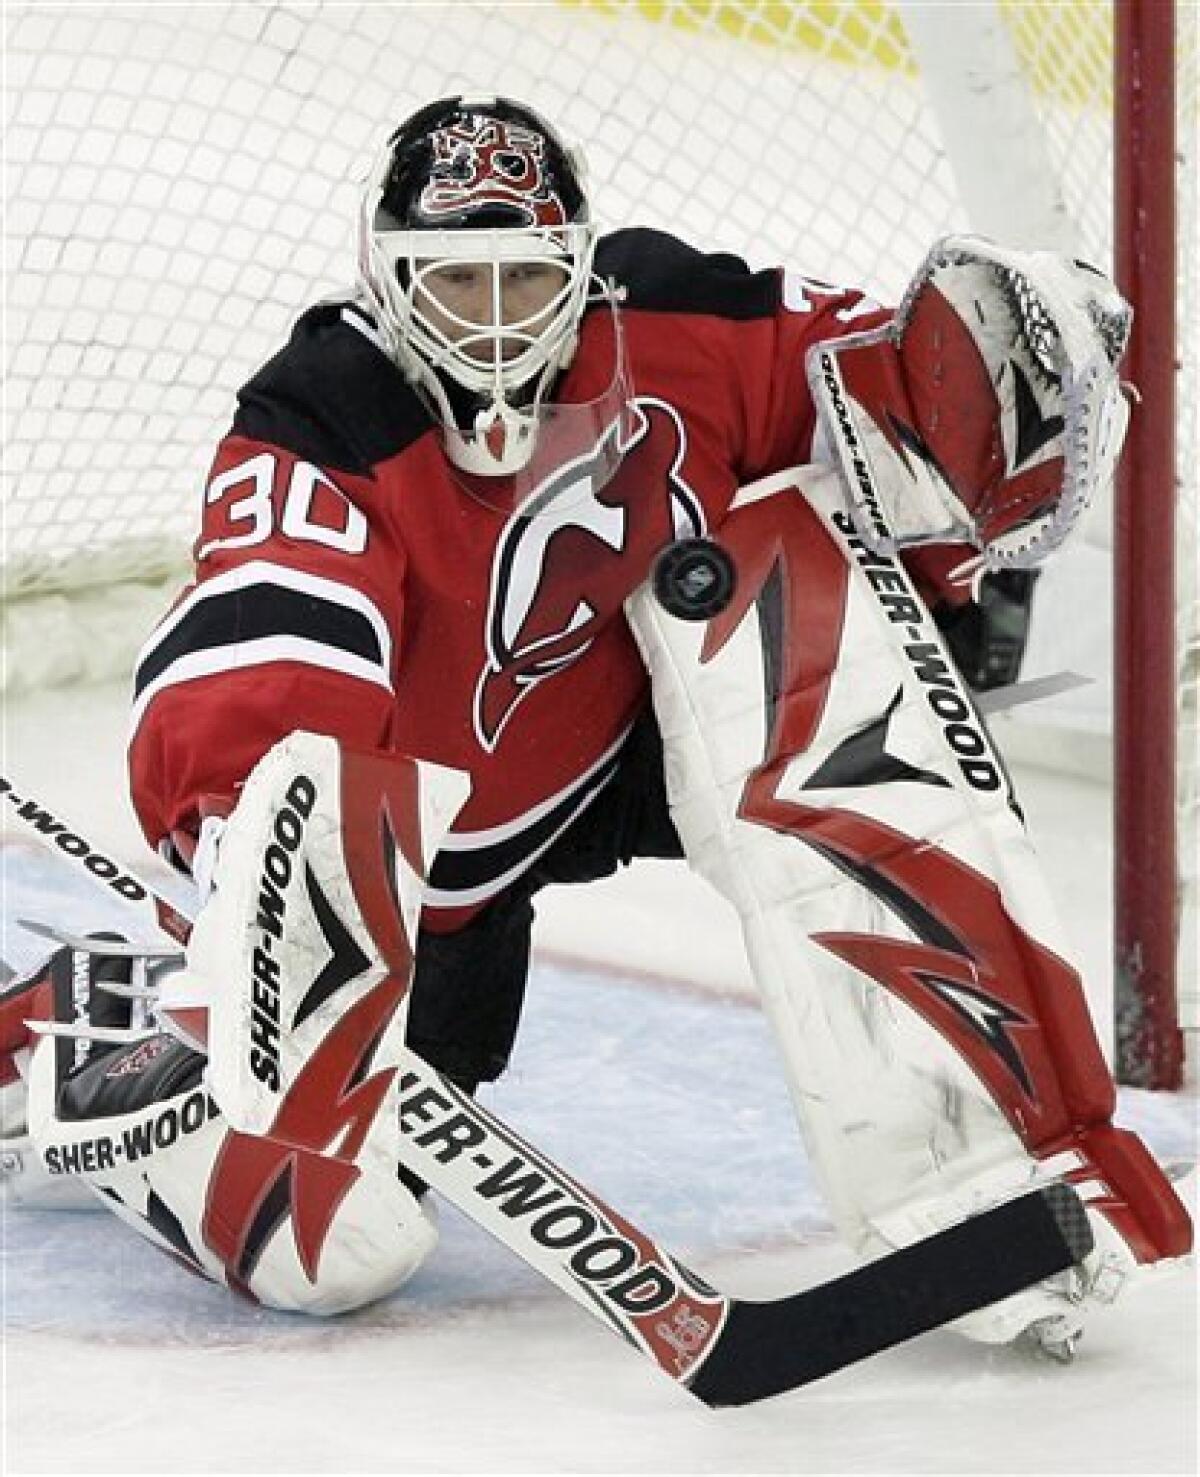 Canadian hockey player Martin Brodeur of the New Jersey Devils